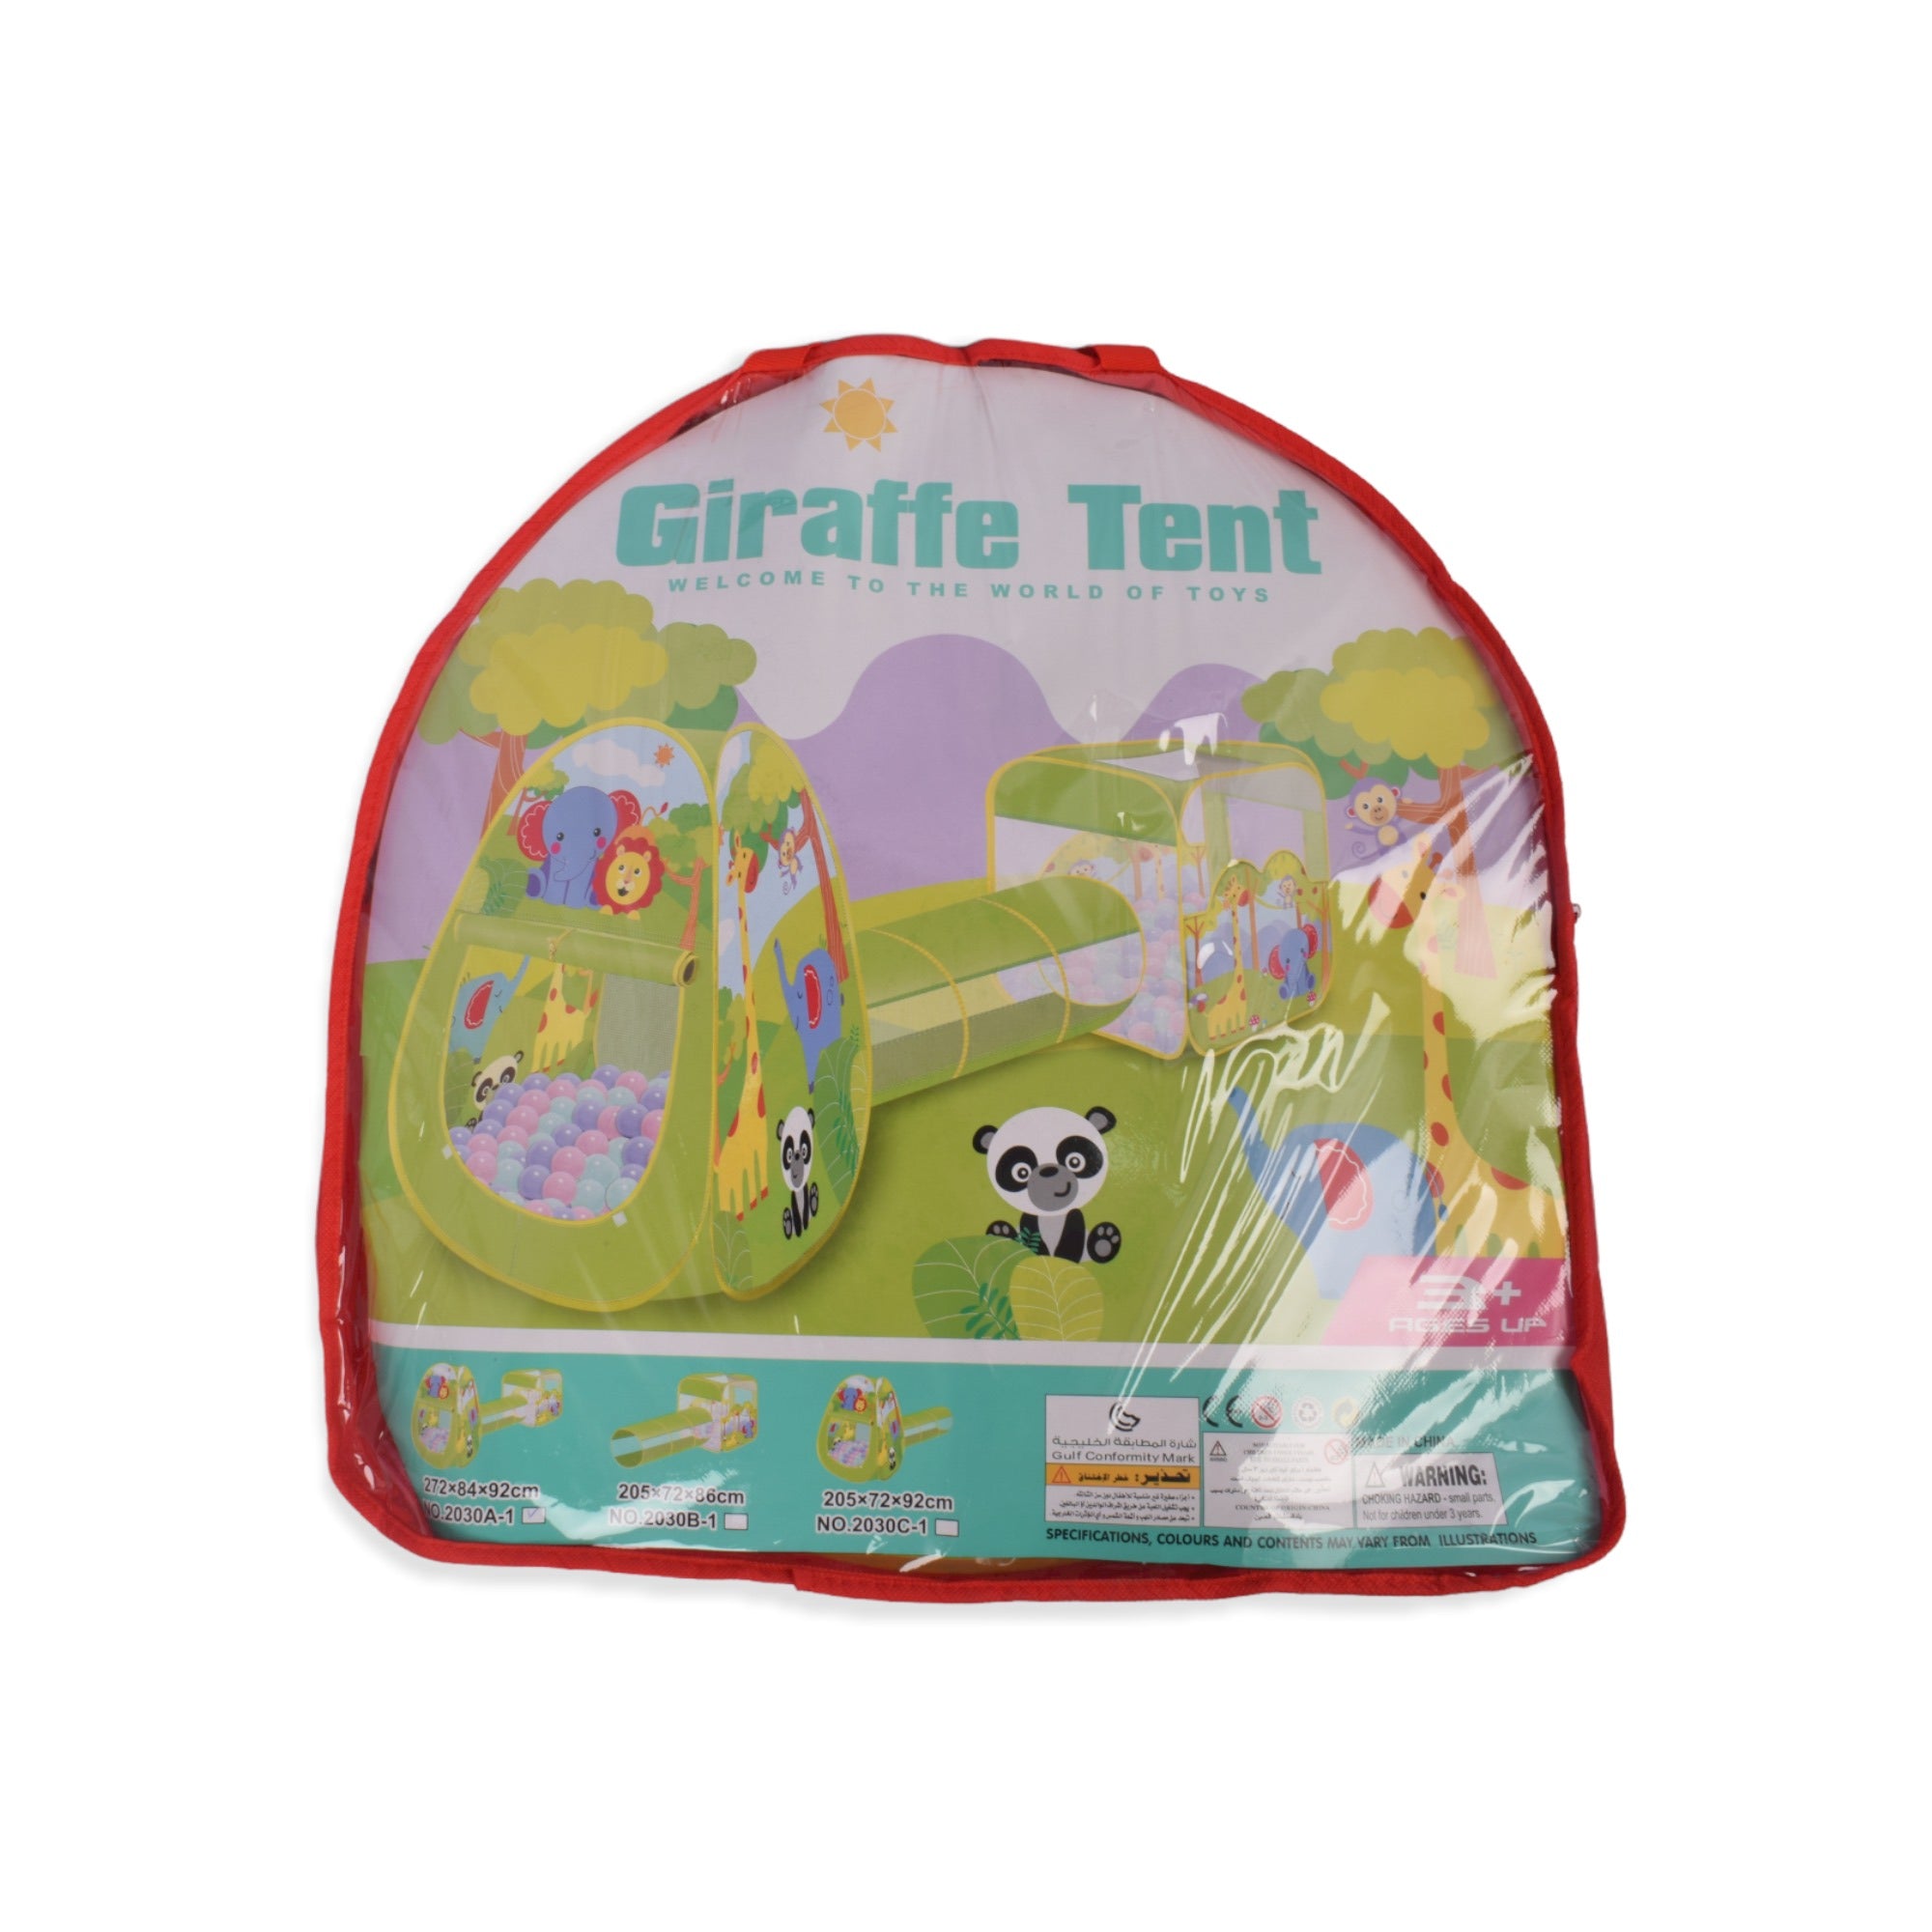 Kids Tent with Tunnel